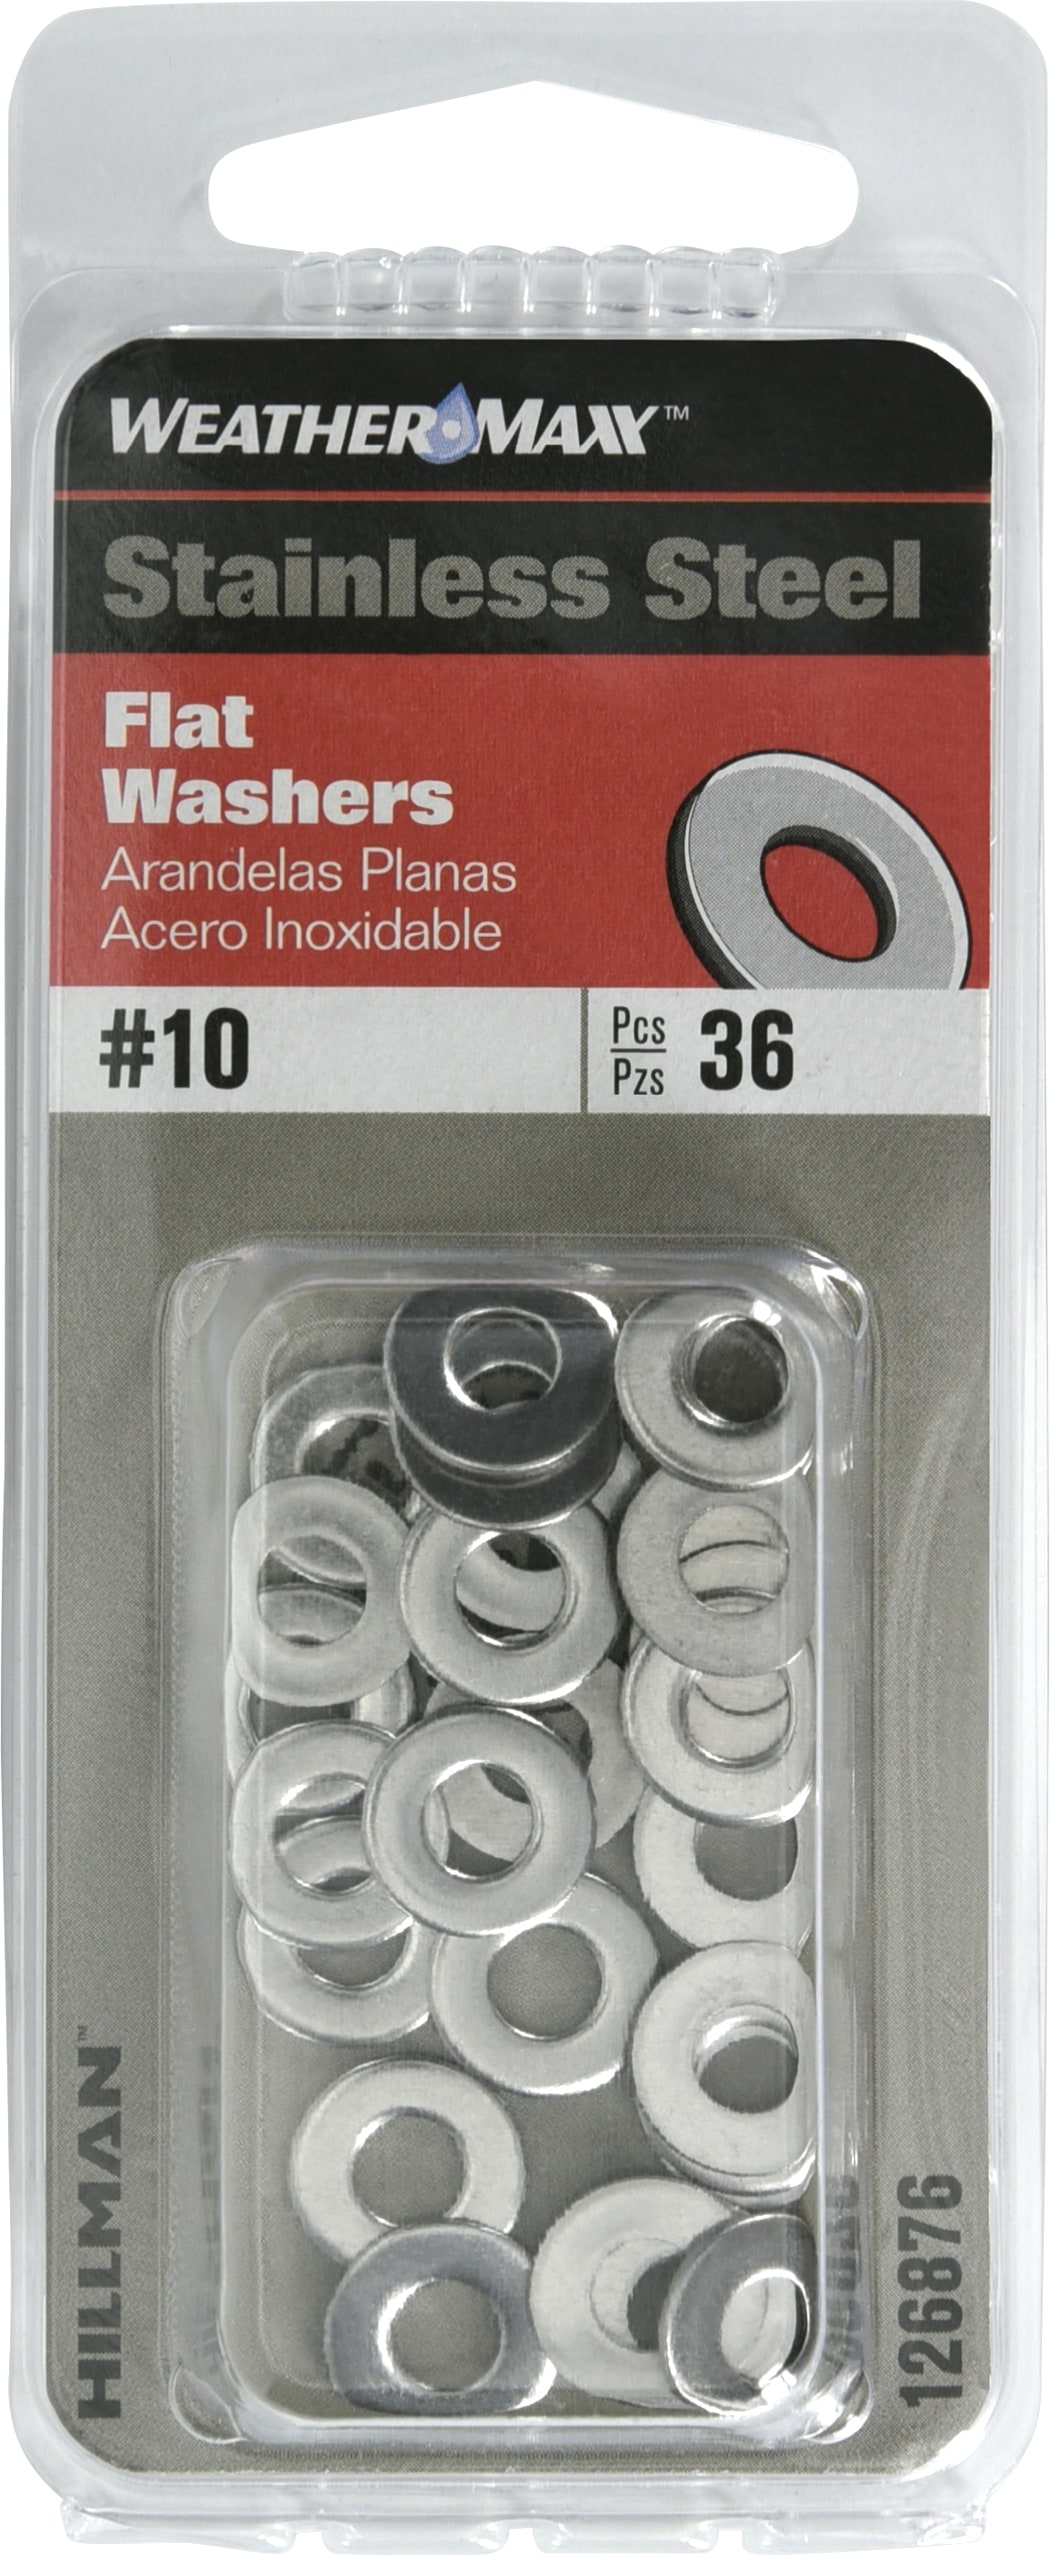 # 10 Flat washers Stainless Steel  250 count 